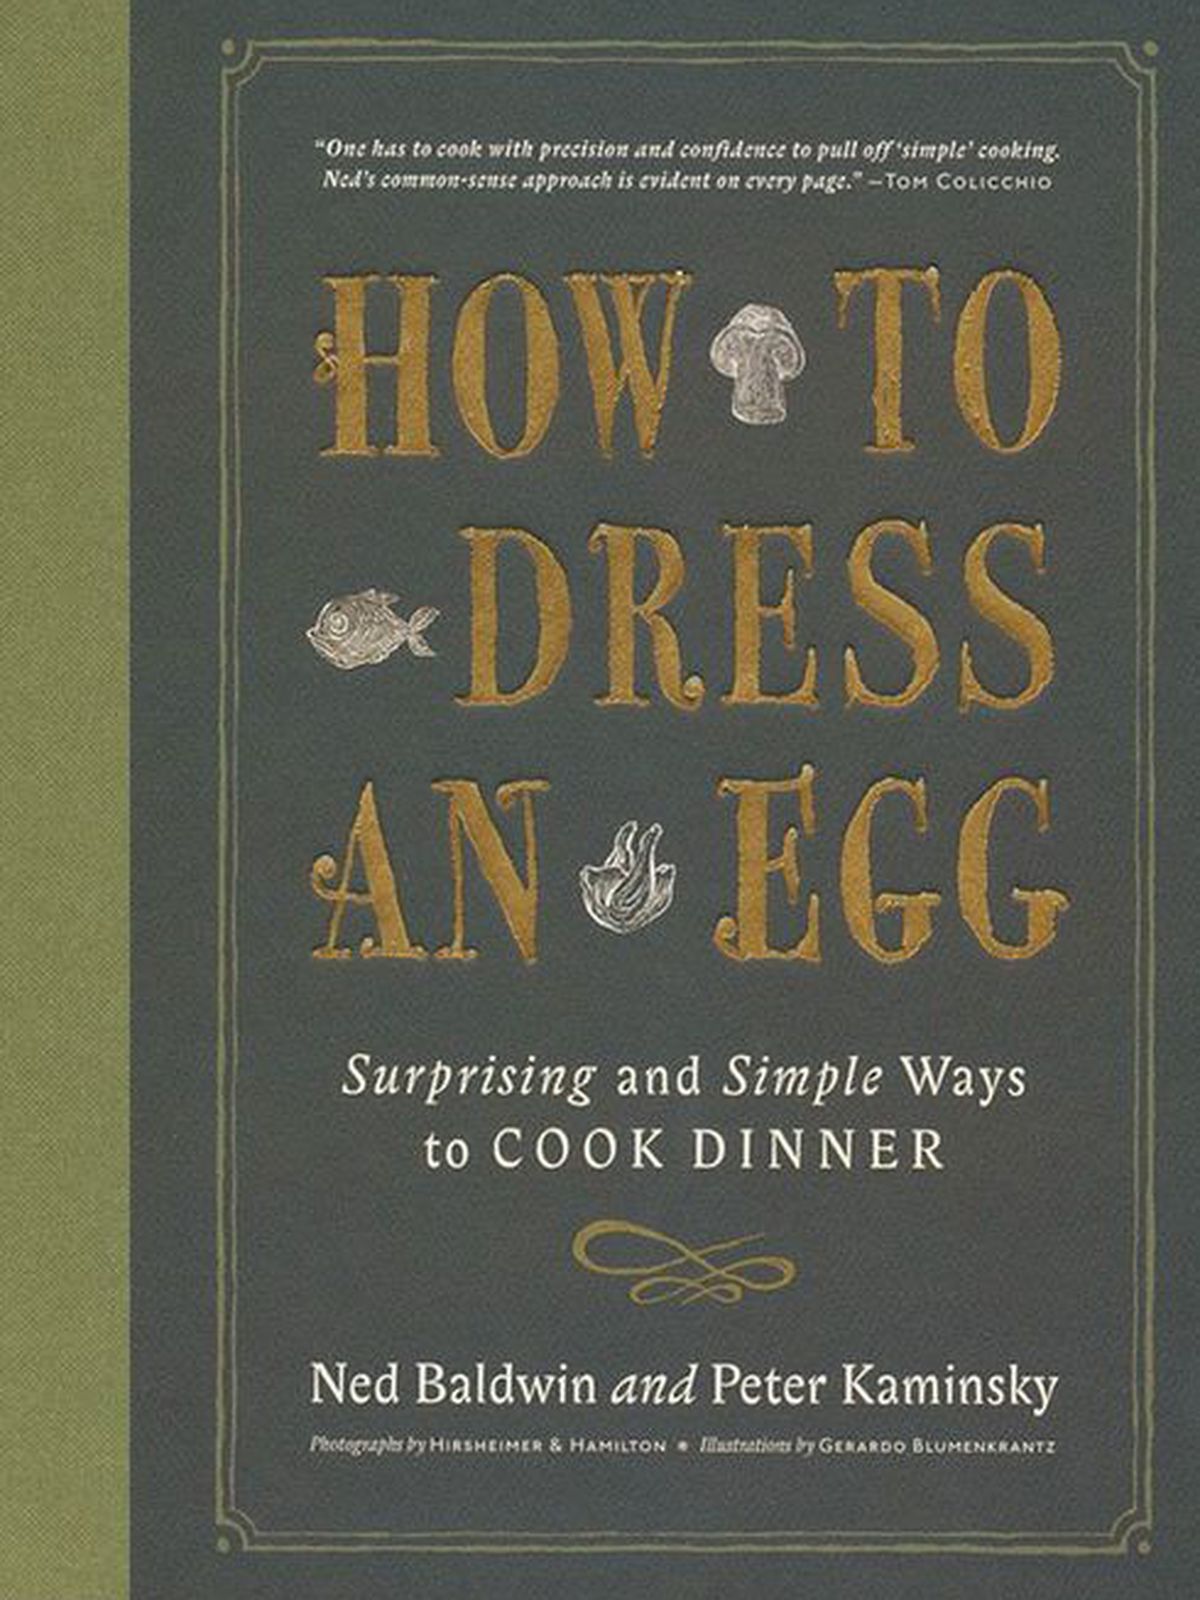 “How to Dress an Egg” cover.